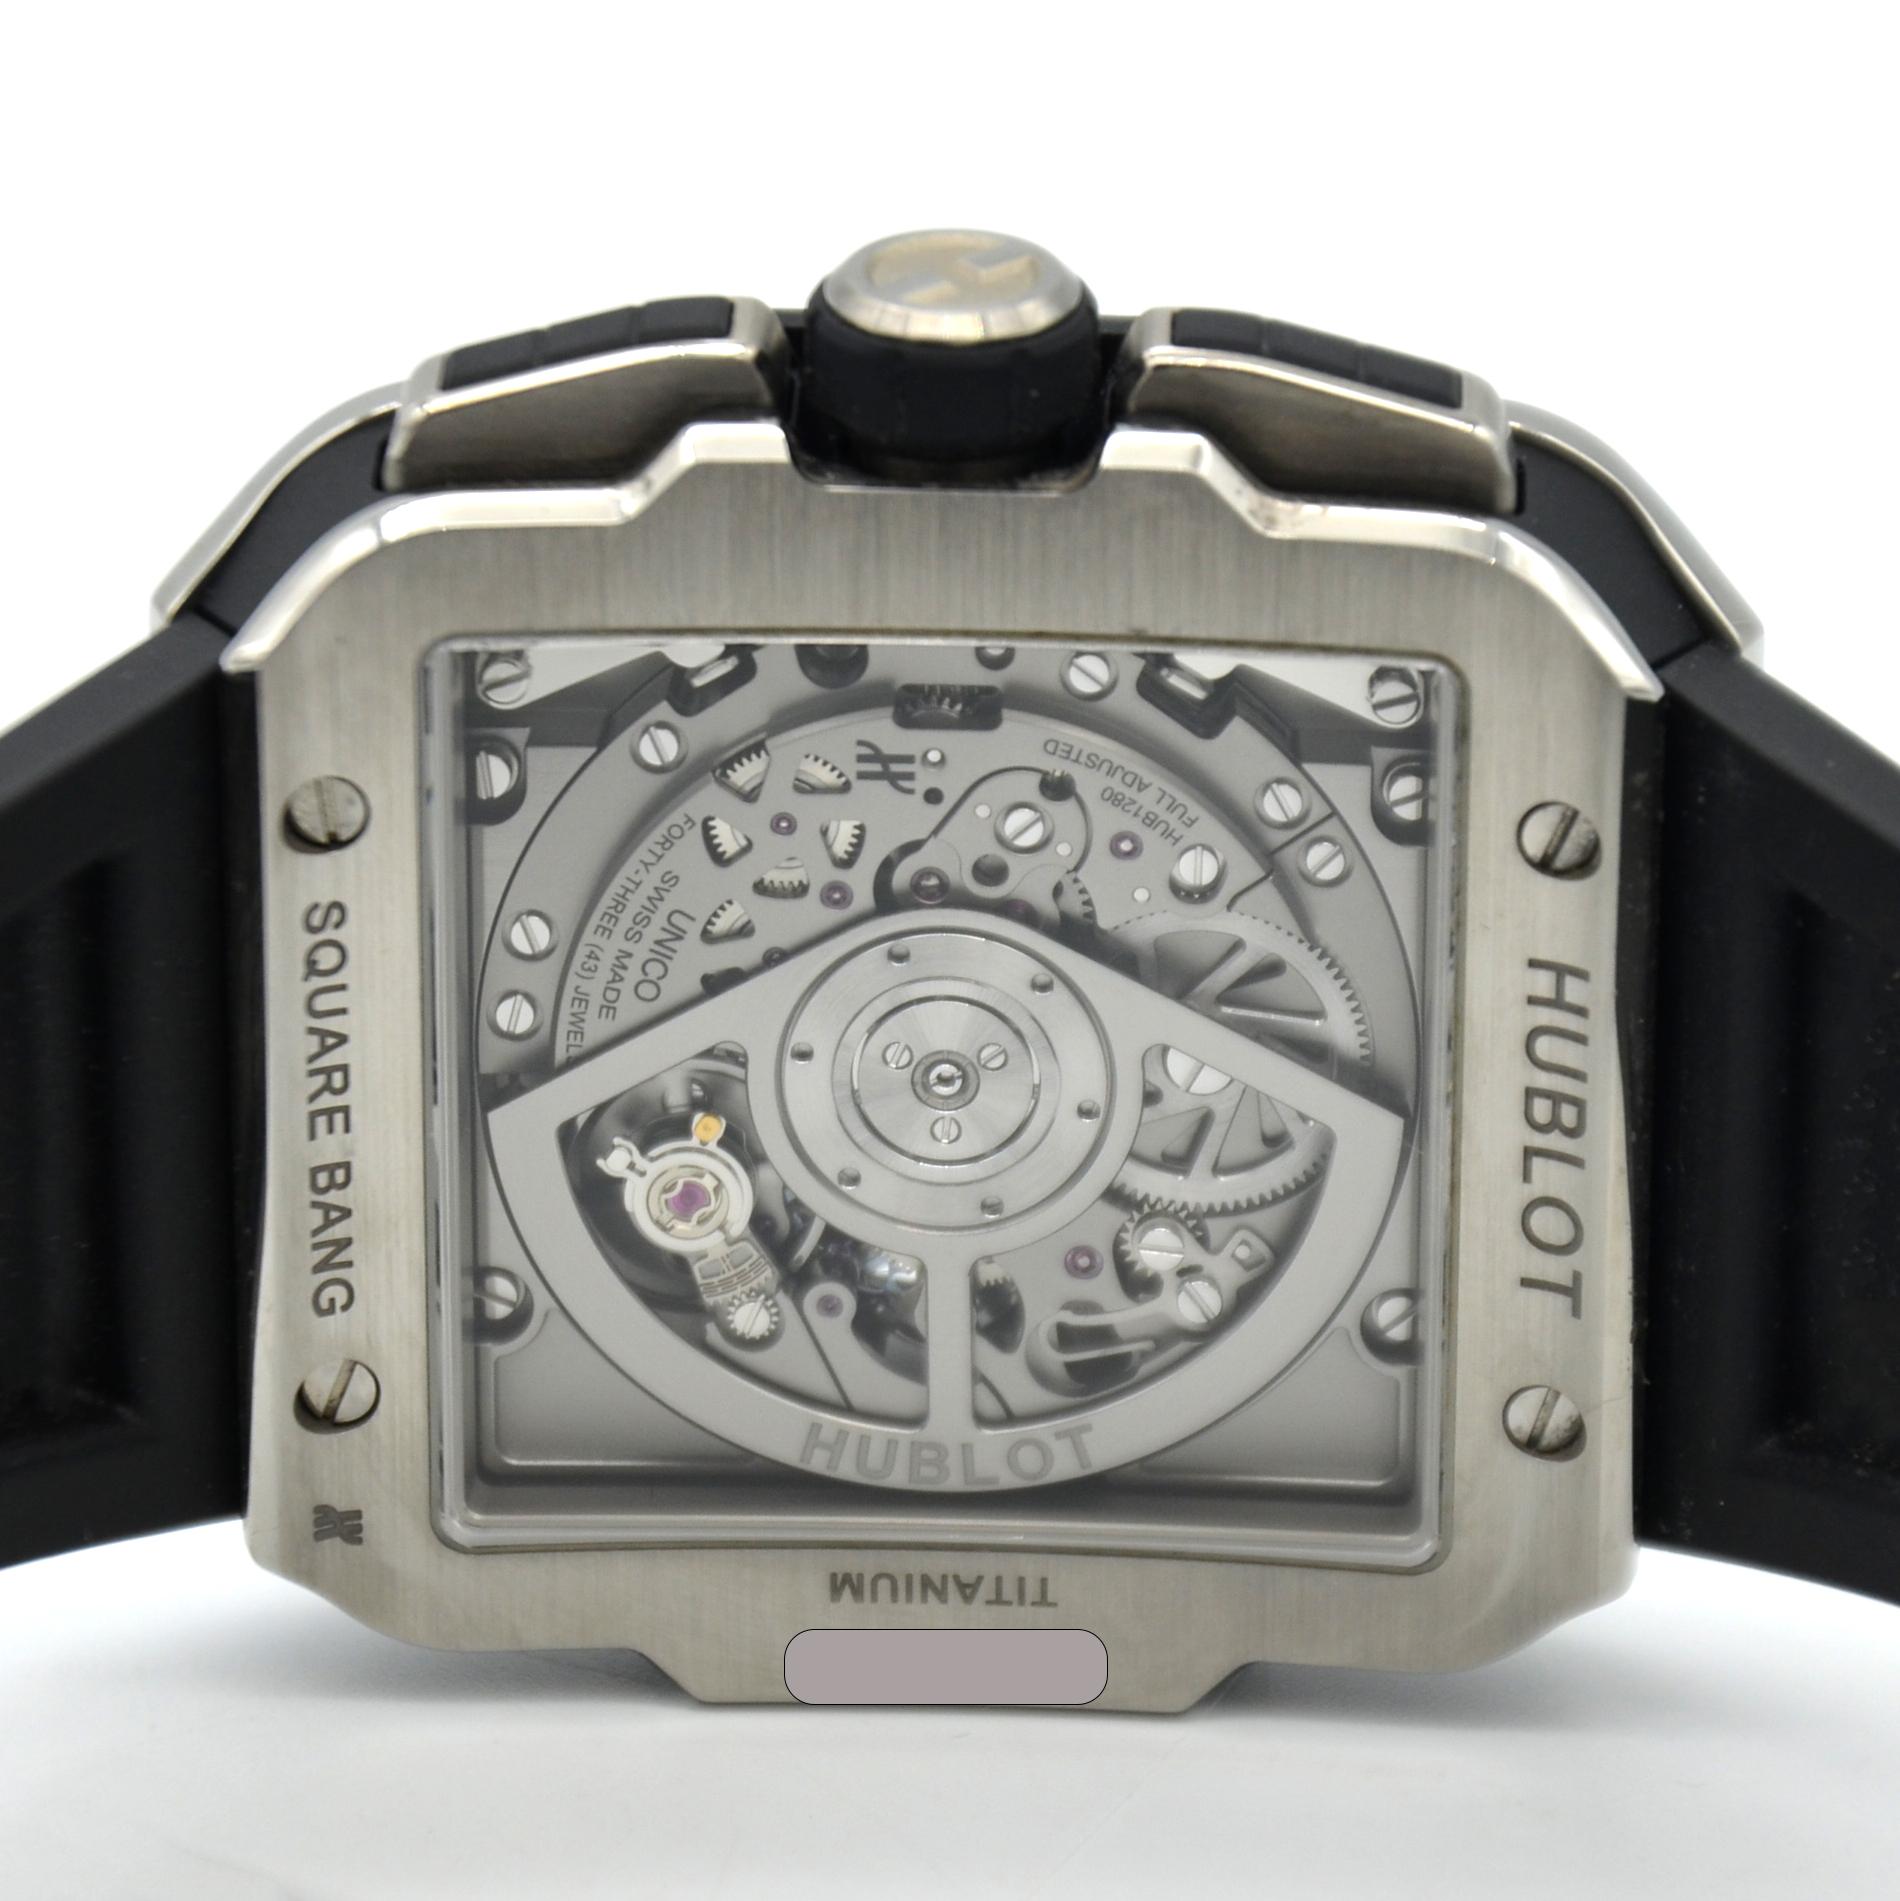 Hublot Square Bang 42mm, Ref. 821.NM.0170.RX For Sale 3